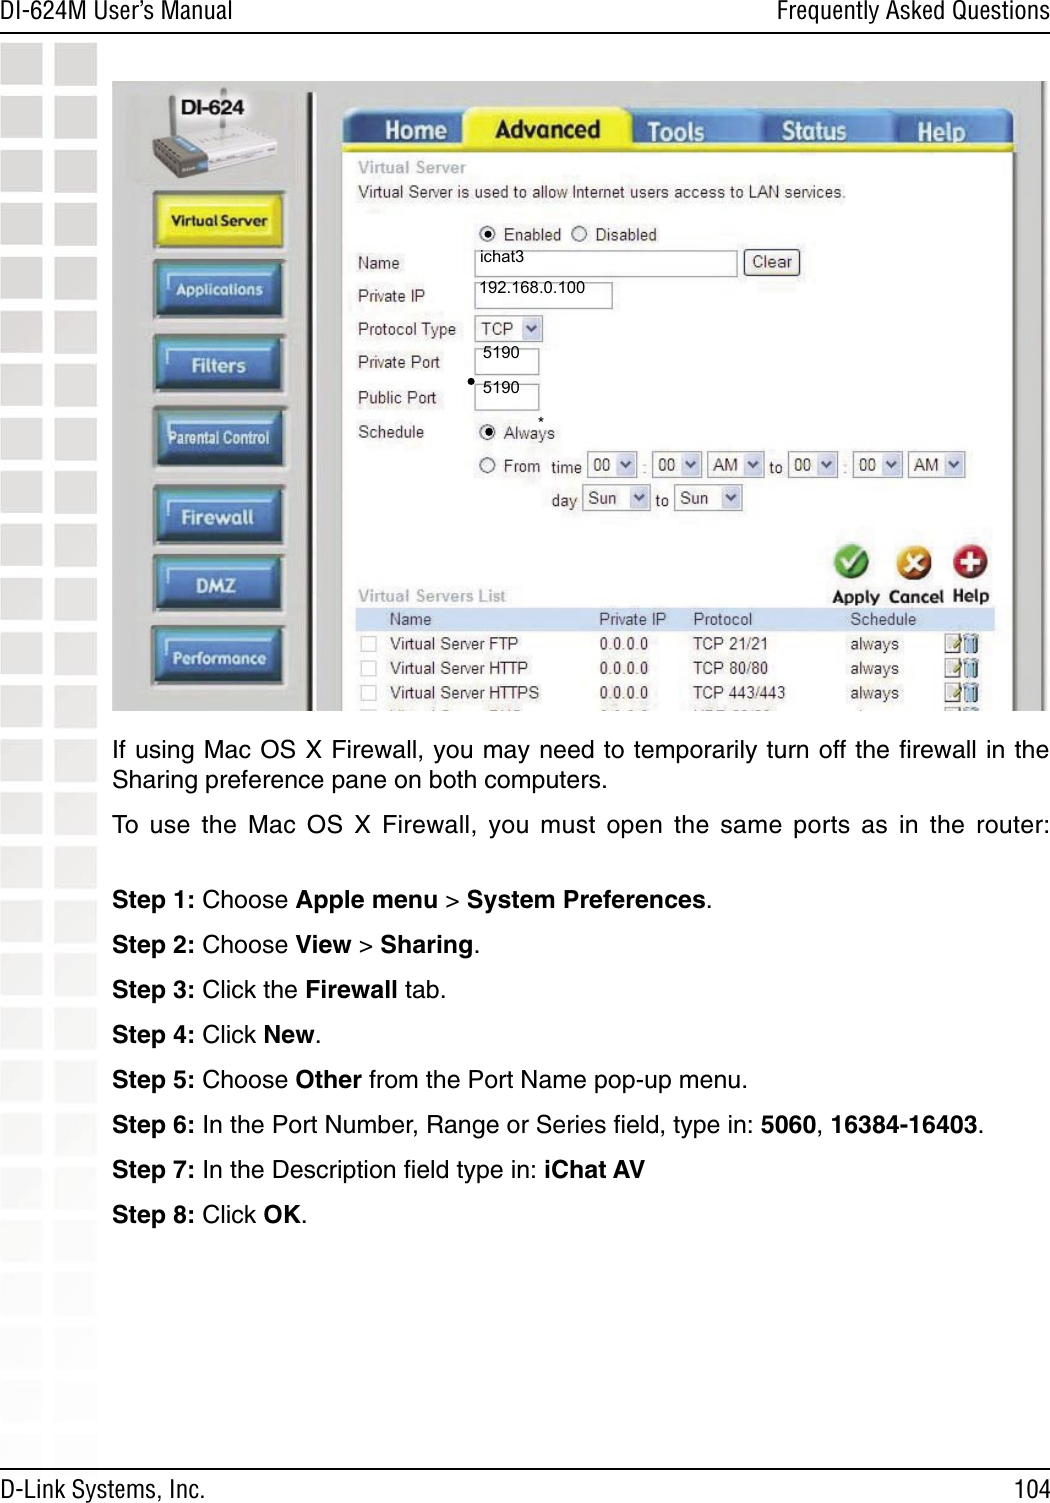 104DI-624M User’s Manual D-Link Systems, Inc.Frequently Asked QuestionsIf using Mac OS X Firewall, you may need to temporarily turn off the ﬁrewall in the Sharing preference pane on both computers. To  use  the  Mac  OS  X  Firewall,  you  must  open  the  same  ports  as  in  the  router:  Step 1: Choose Apple menu &gt; System Preferences. Step 2: Choose View &gt; Sharing. Step 3: Click the Firewall tab.Step 4: Click New. Step 5: Choose Other from the Port Name pop-up menu.Step 6: In the Port Number, Range or Series ﬁeld, type in: 5060, 16384-16403. Step 7: In the Description ﬁeld type in: iChat AV Step 8: Click OK.  192.168.0.100ichat3*51905190